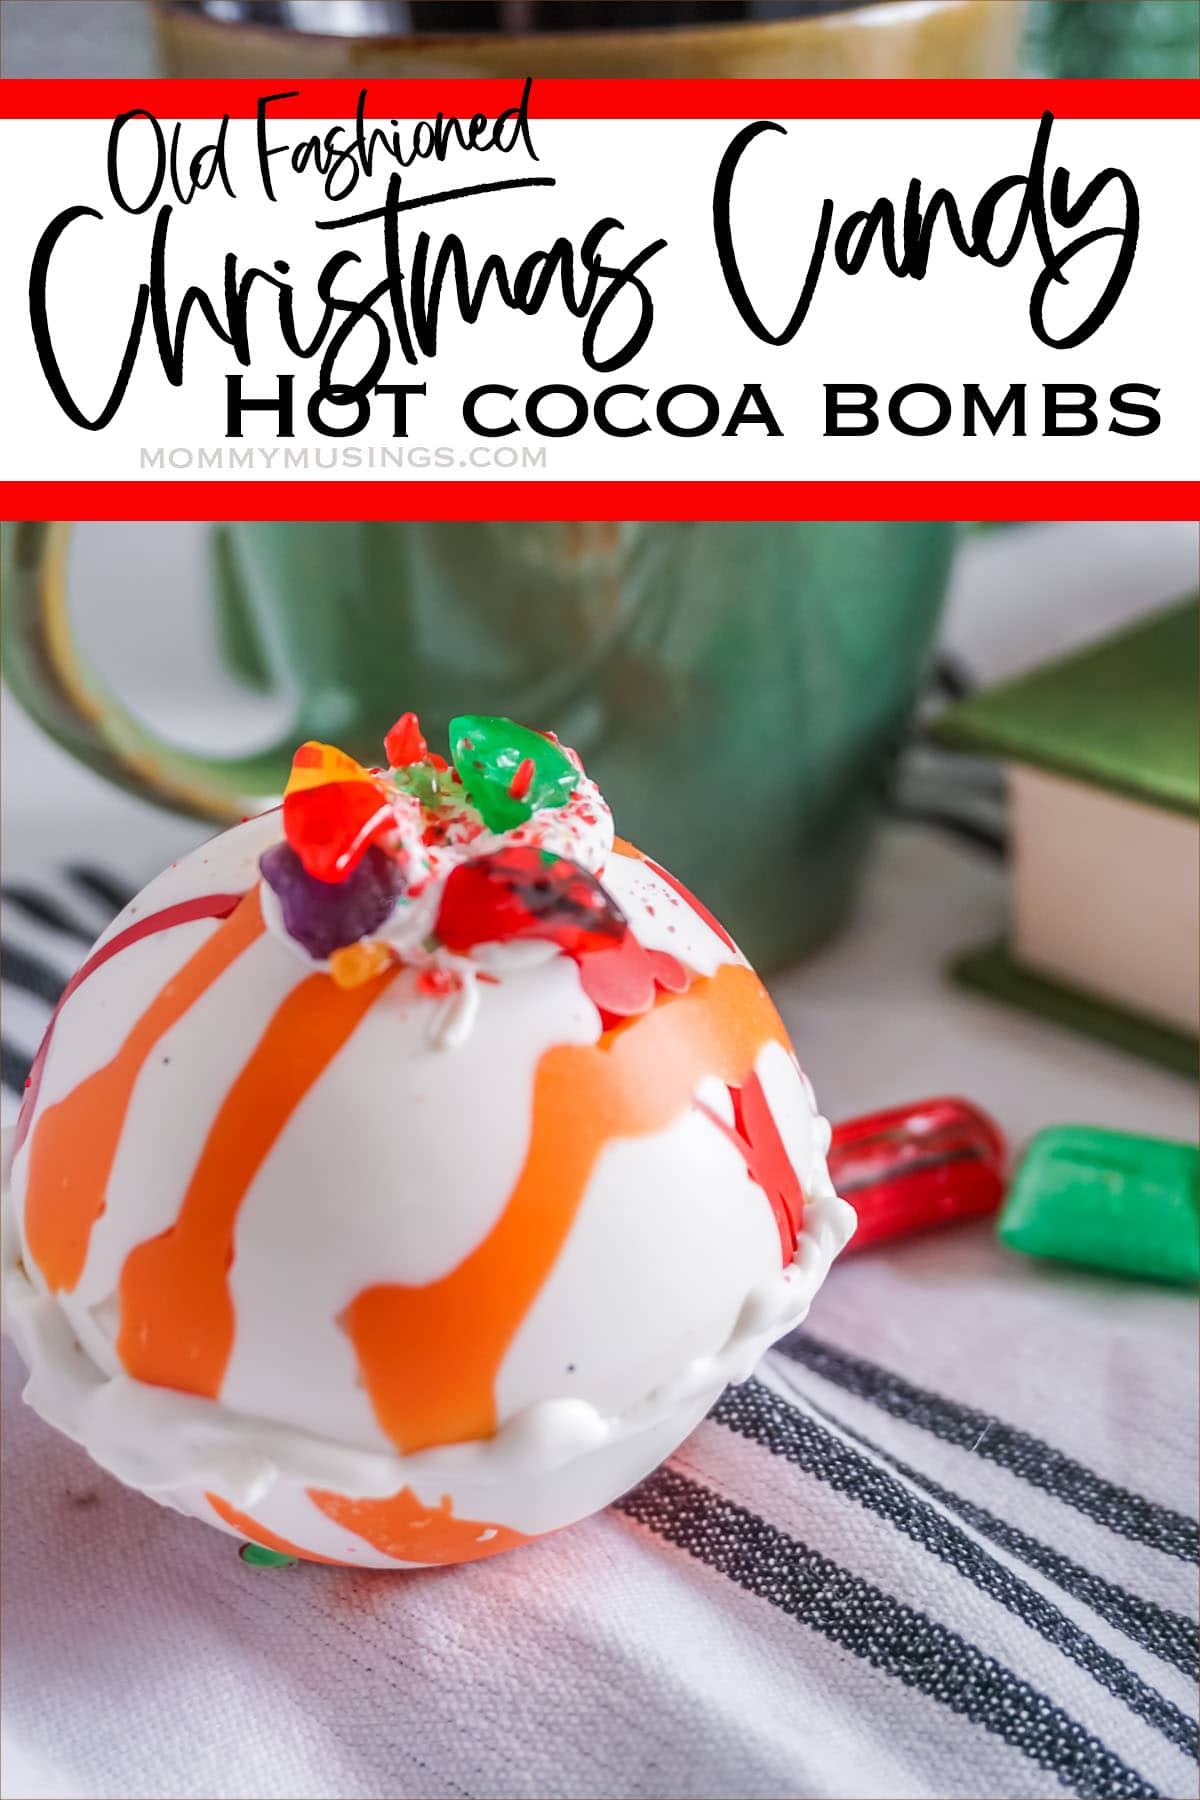 closeup of a white chocolate hot cocoa bomb with text which reads Old Fashioned Christmas Candy Hot Cocoa Bombs